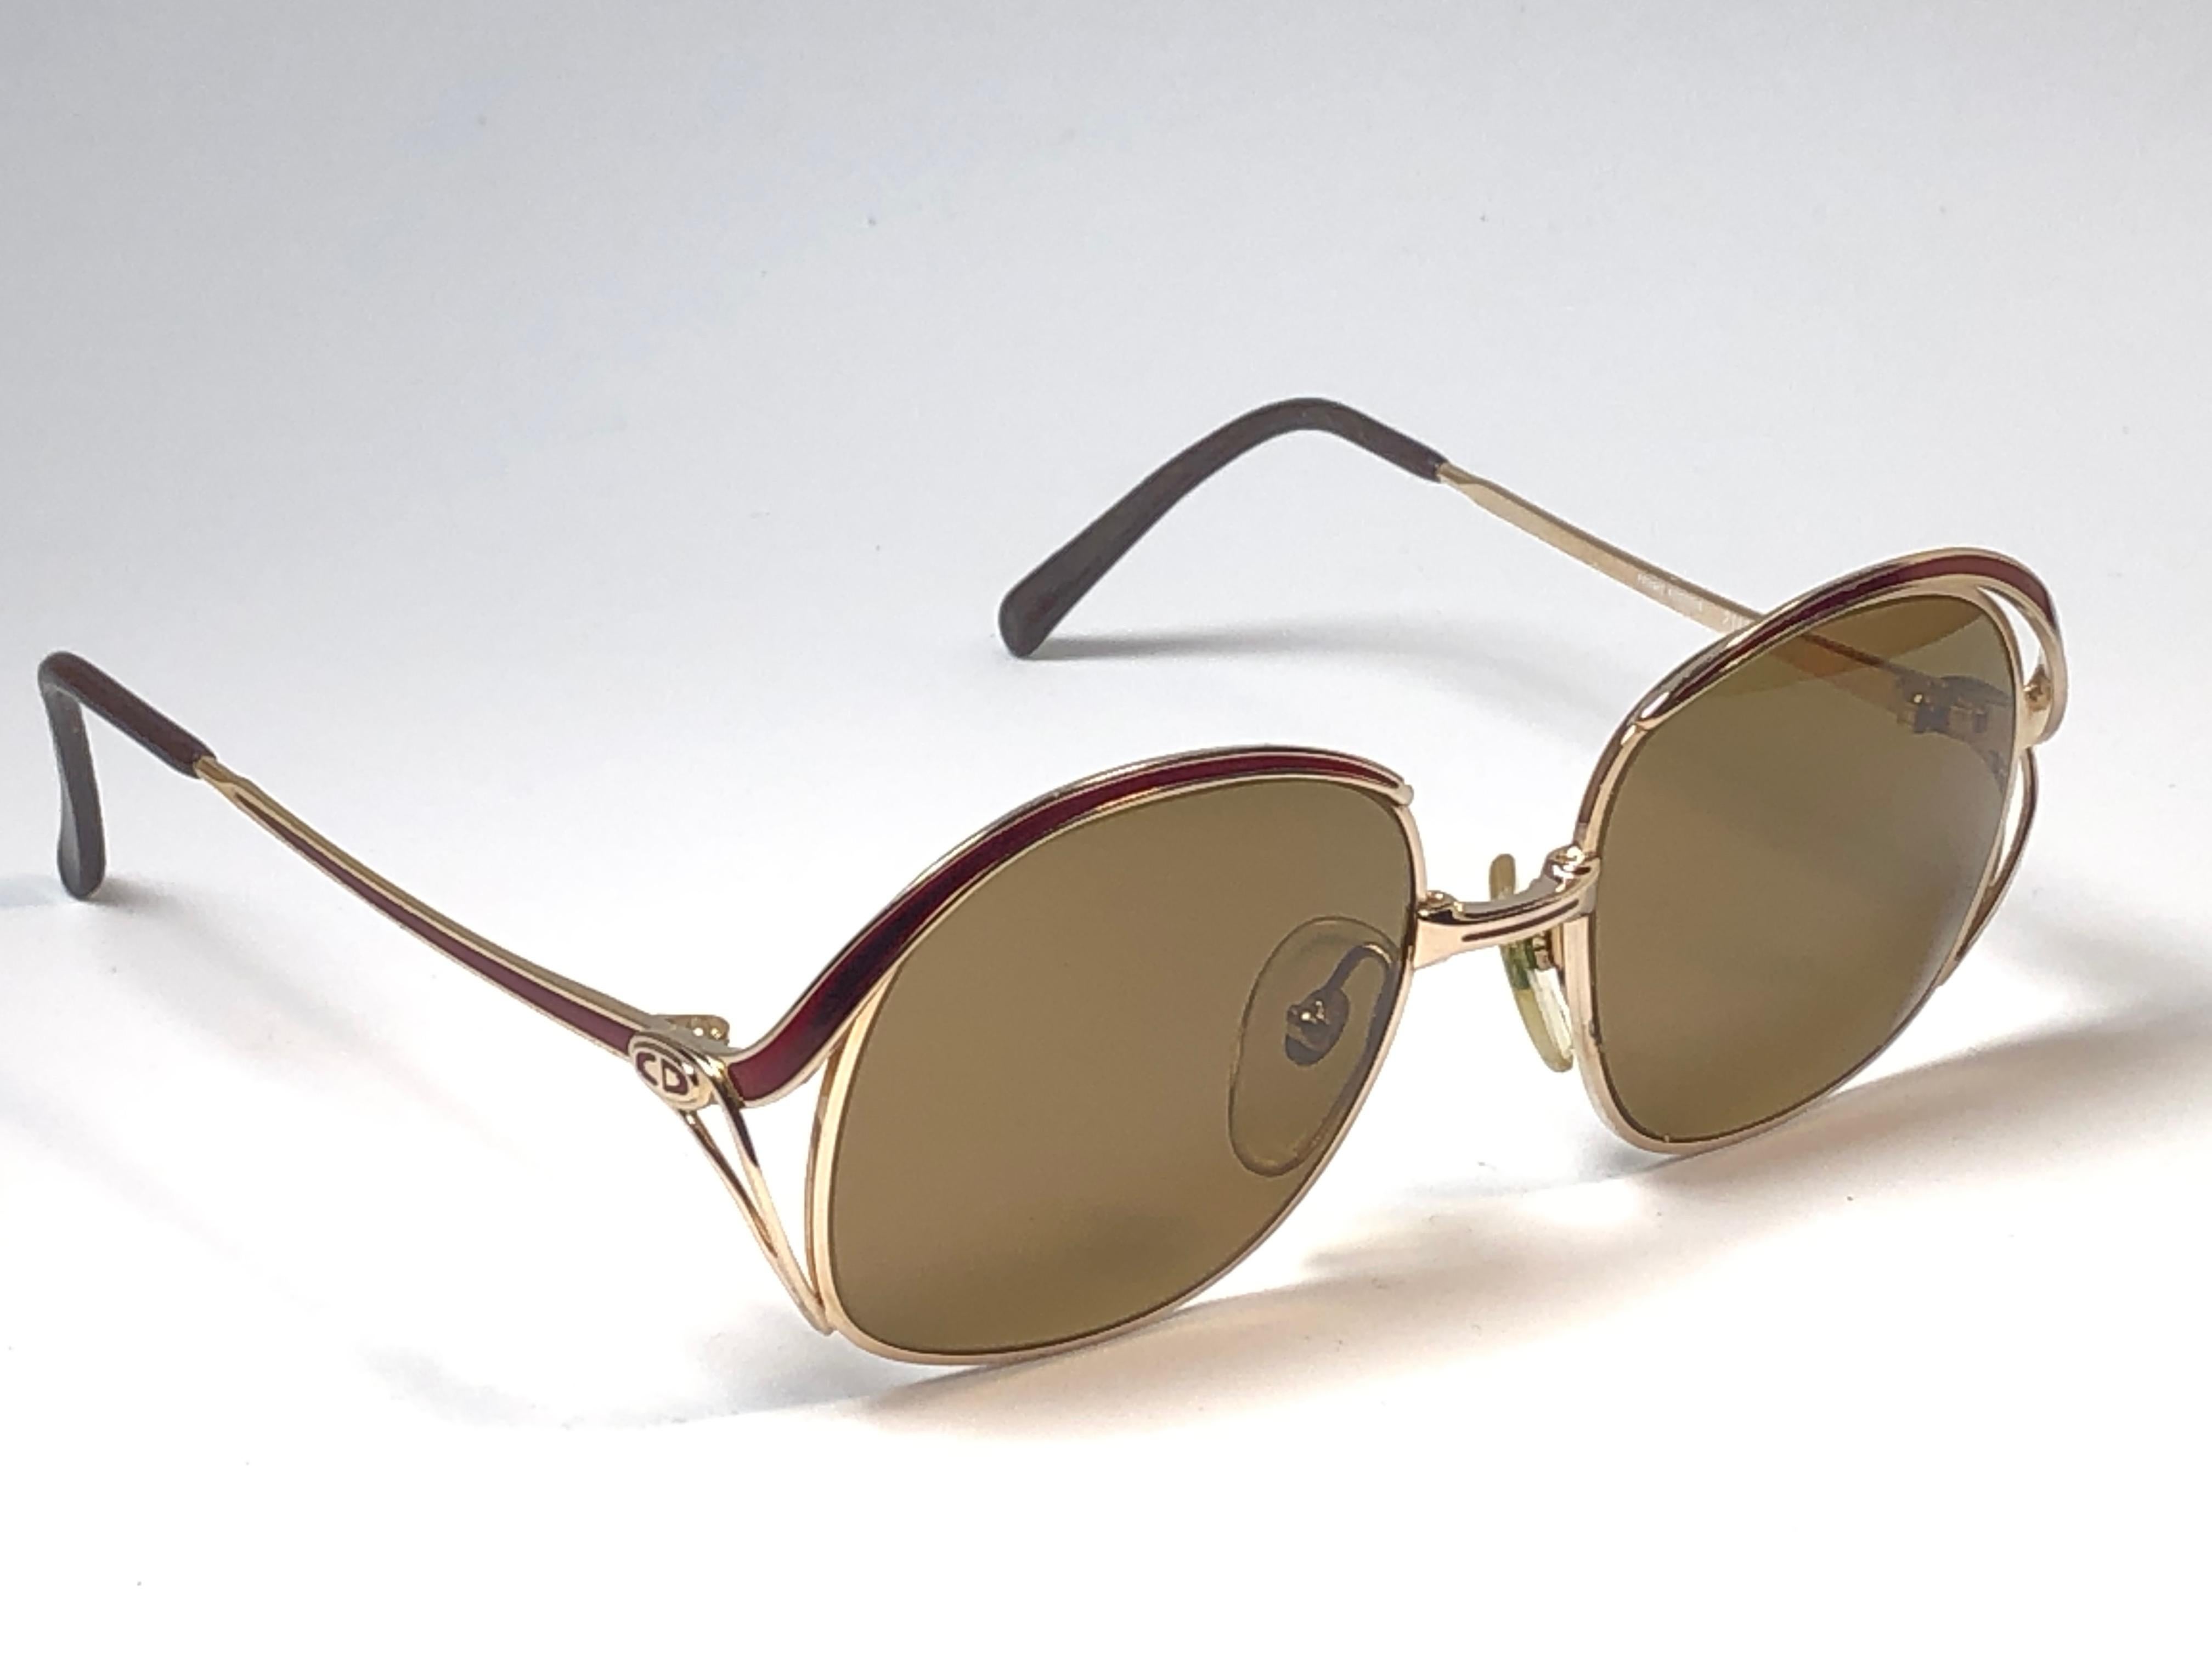 New vintage Christian Dior sunglasses. Burgundy enamel details over a gold frame.

Grey lenses.

Comes with it original CD sleeve.

New, never worn or displayed this item may show light sign of wear due to storage.

Made in Austria
